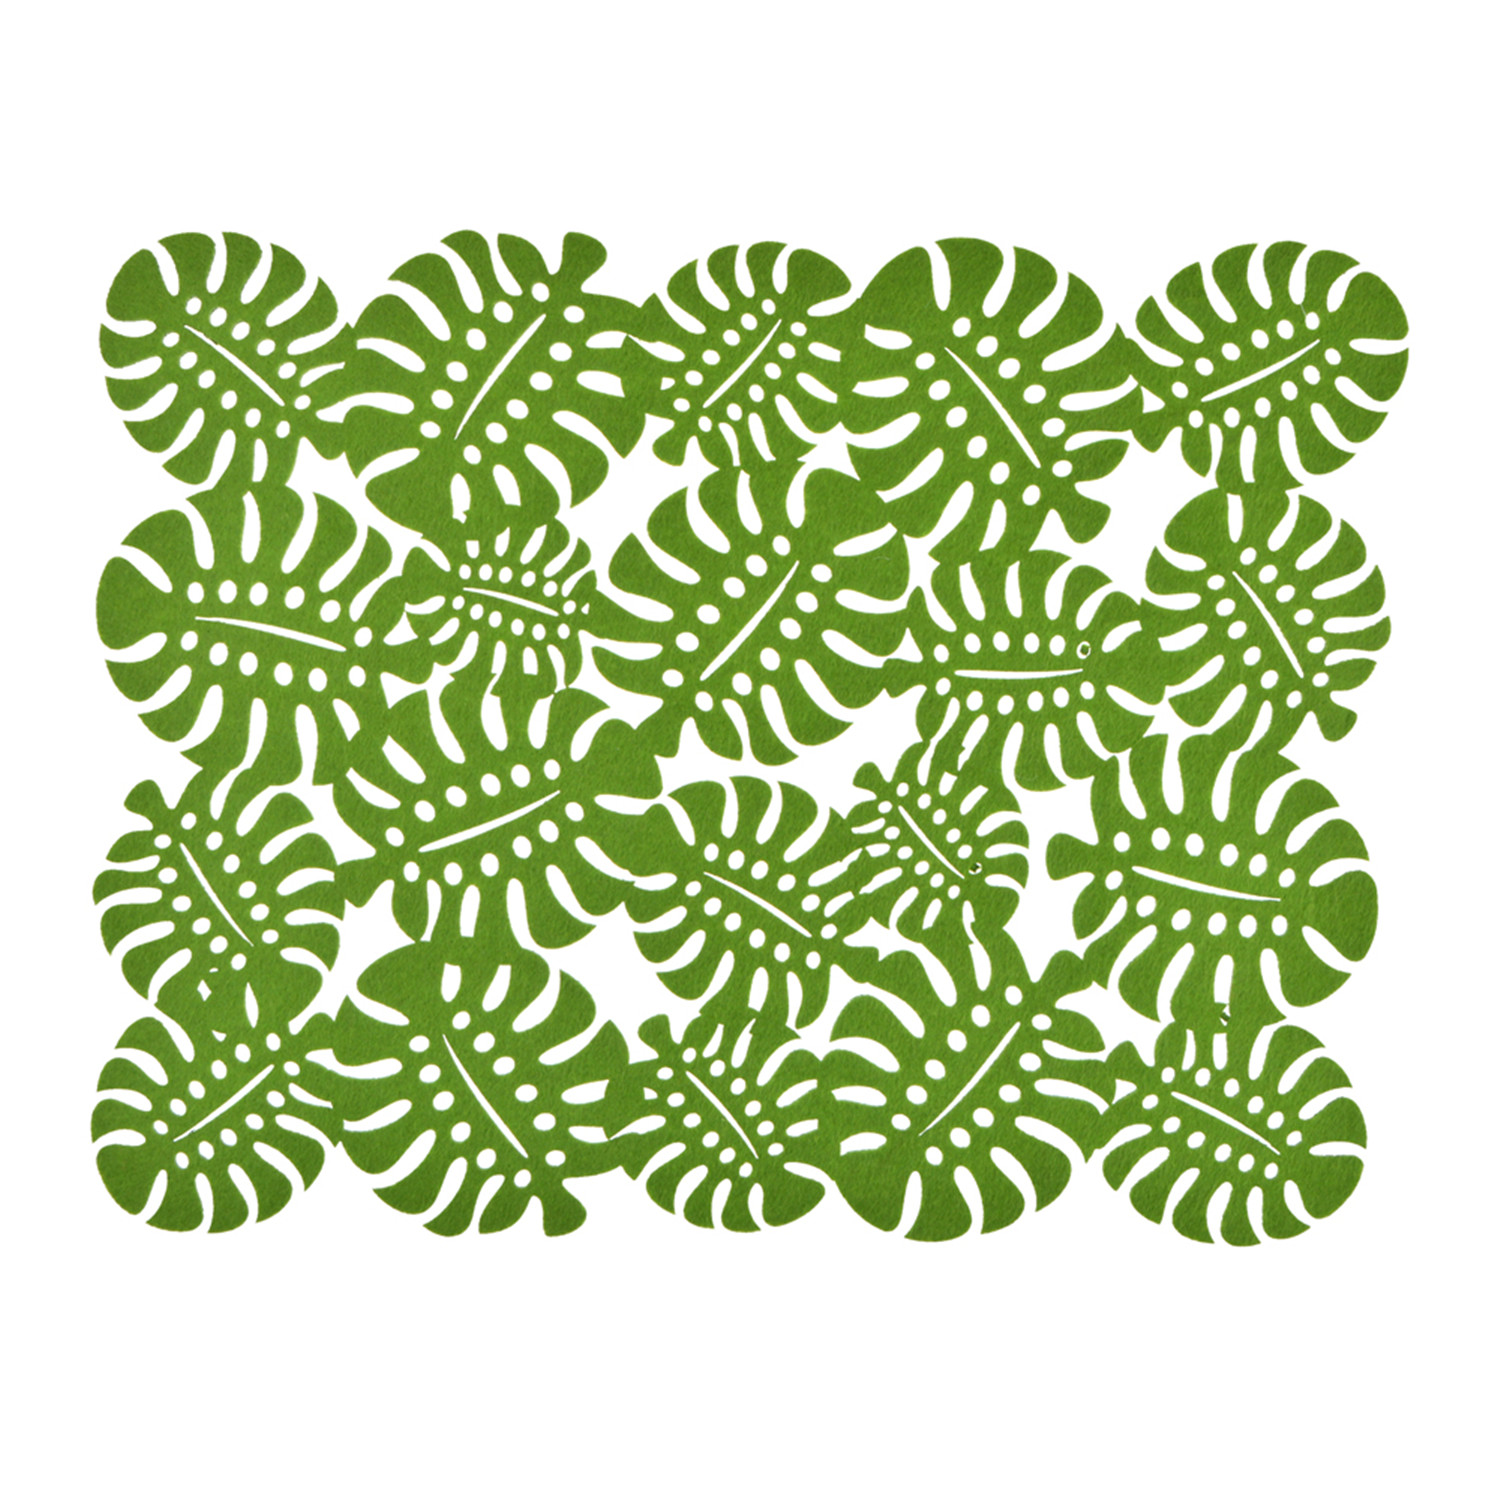 felt leaves pattern placemat and coaster table mat Wedding decor ideas